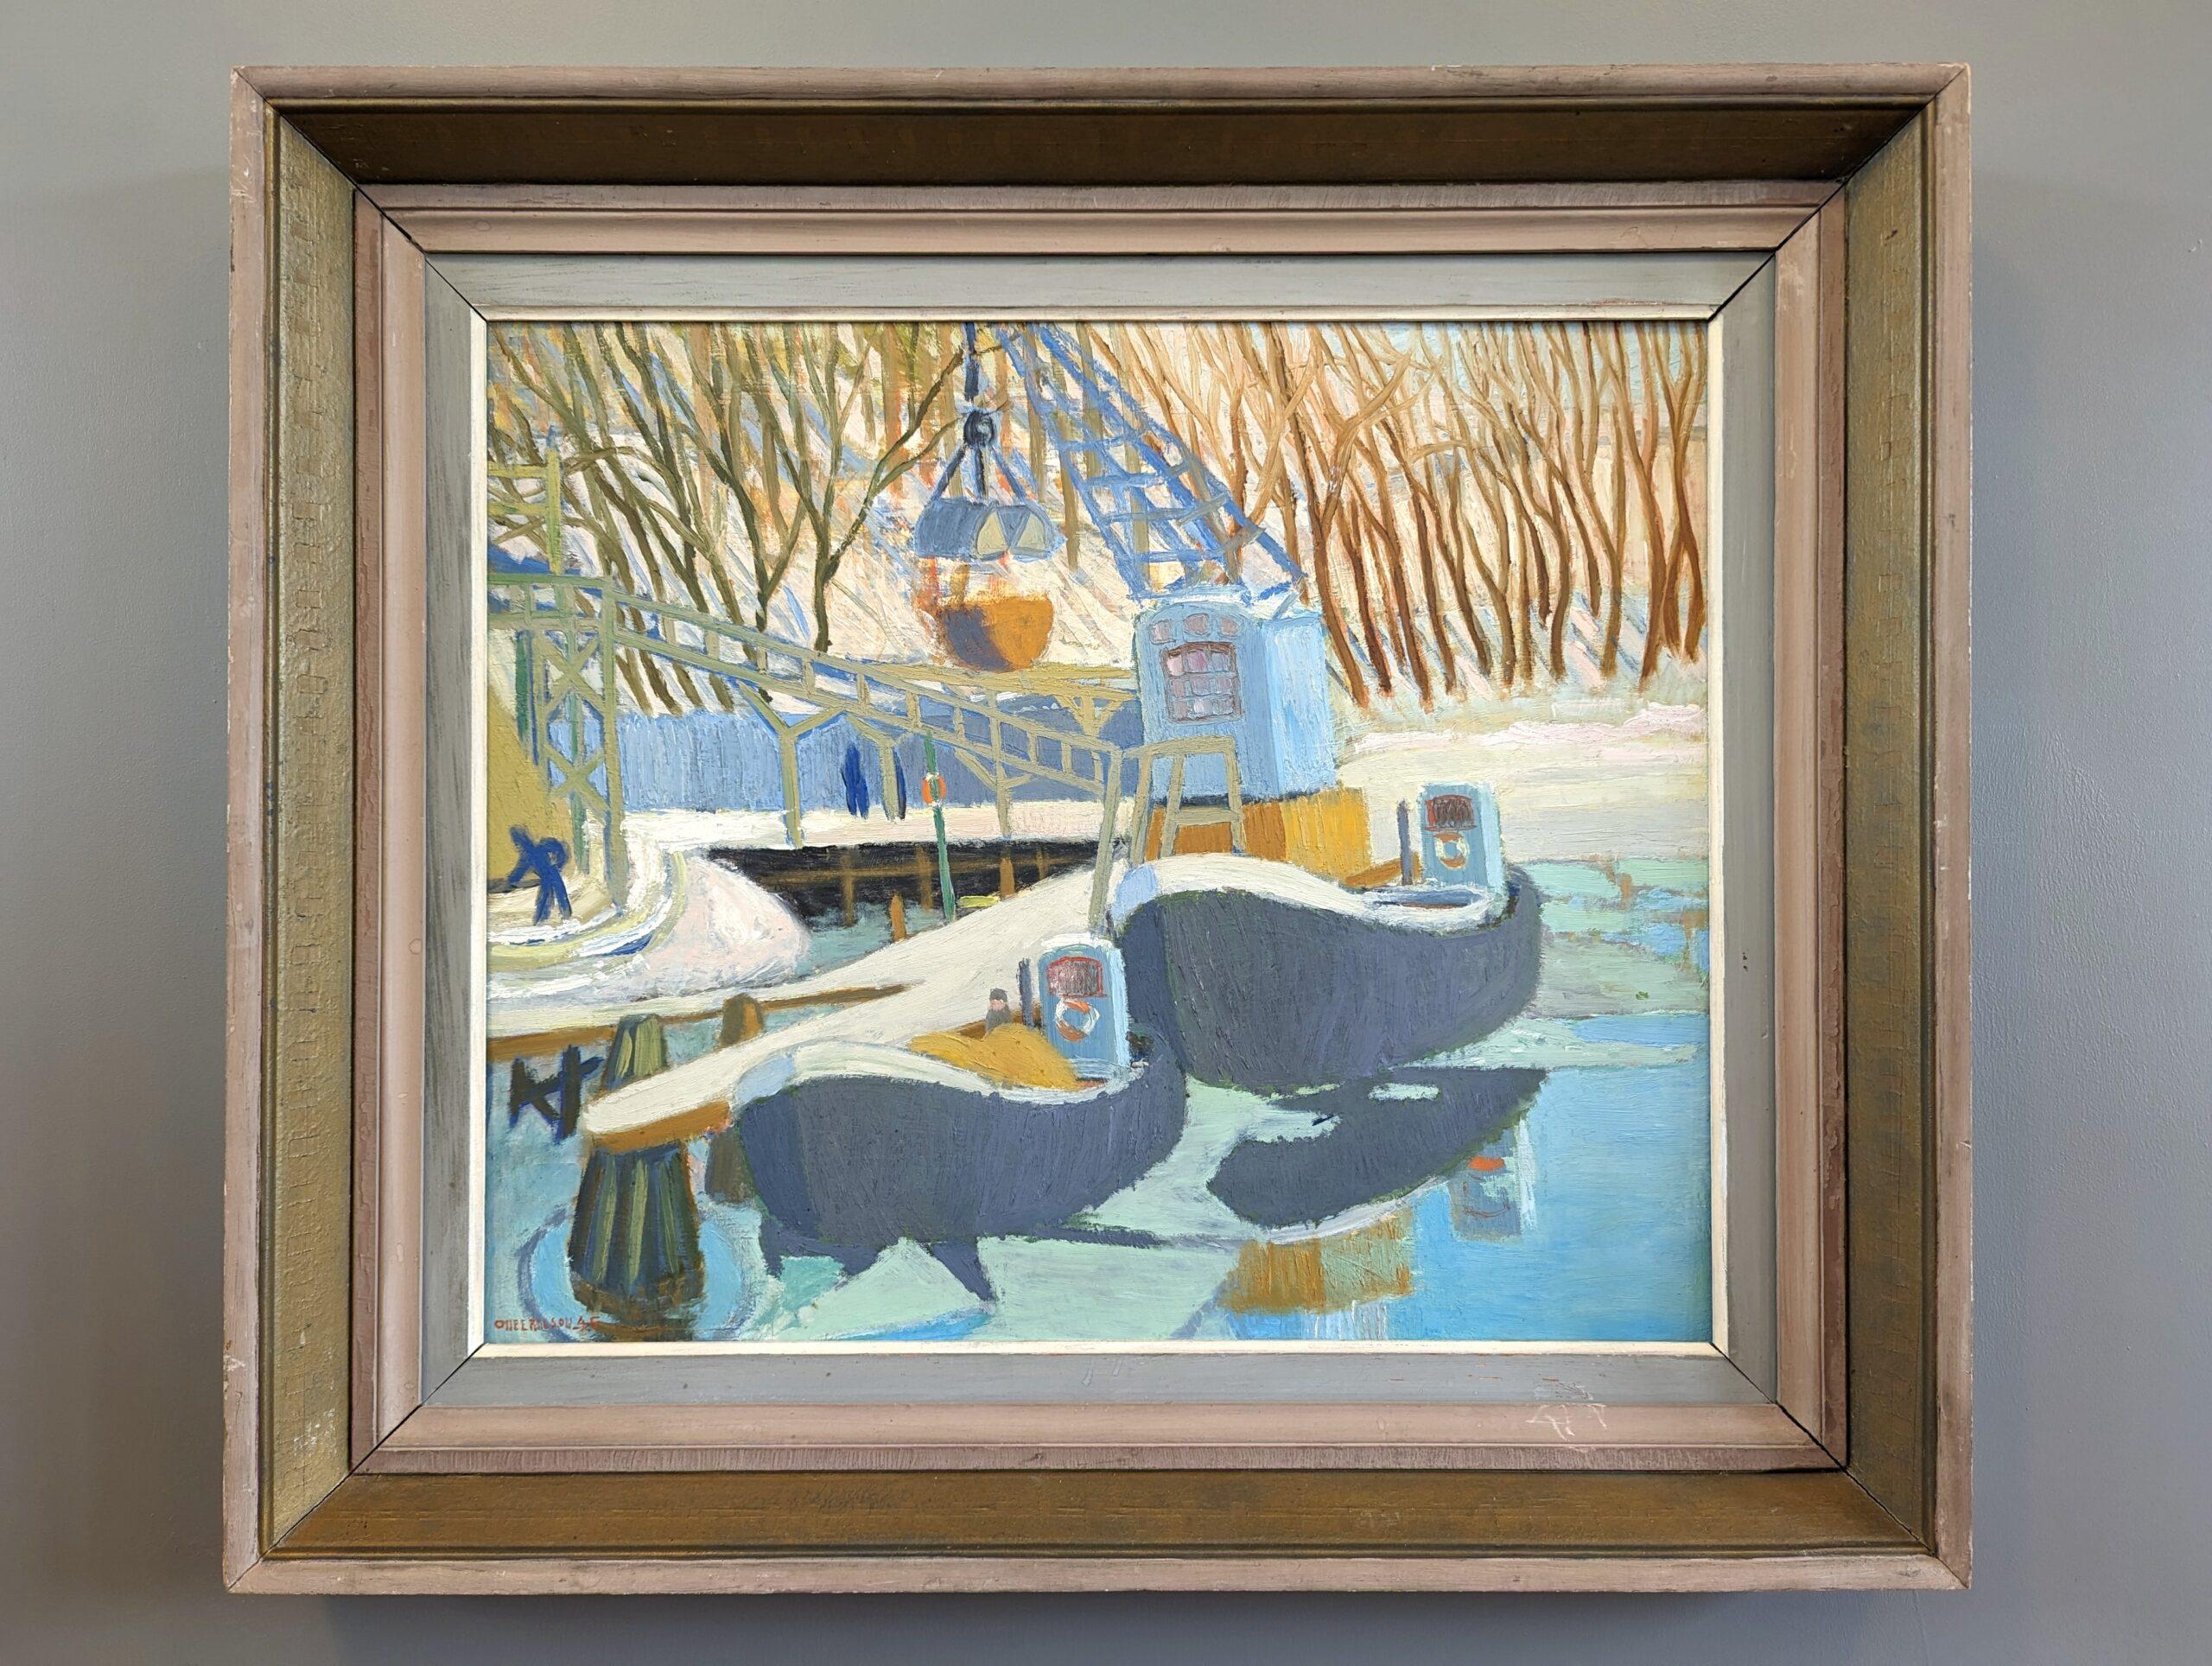 QUAY CRANES
Oil on Board
Size: 61 x 70 cm (including frame)

A brilliantly executed mid-century modernist seascape composition in oil, painted into board and dated 1945.

This nautical piece depicts a winter harbourside scene, with boats docked by